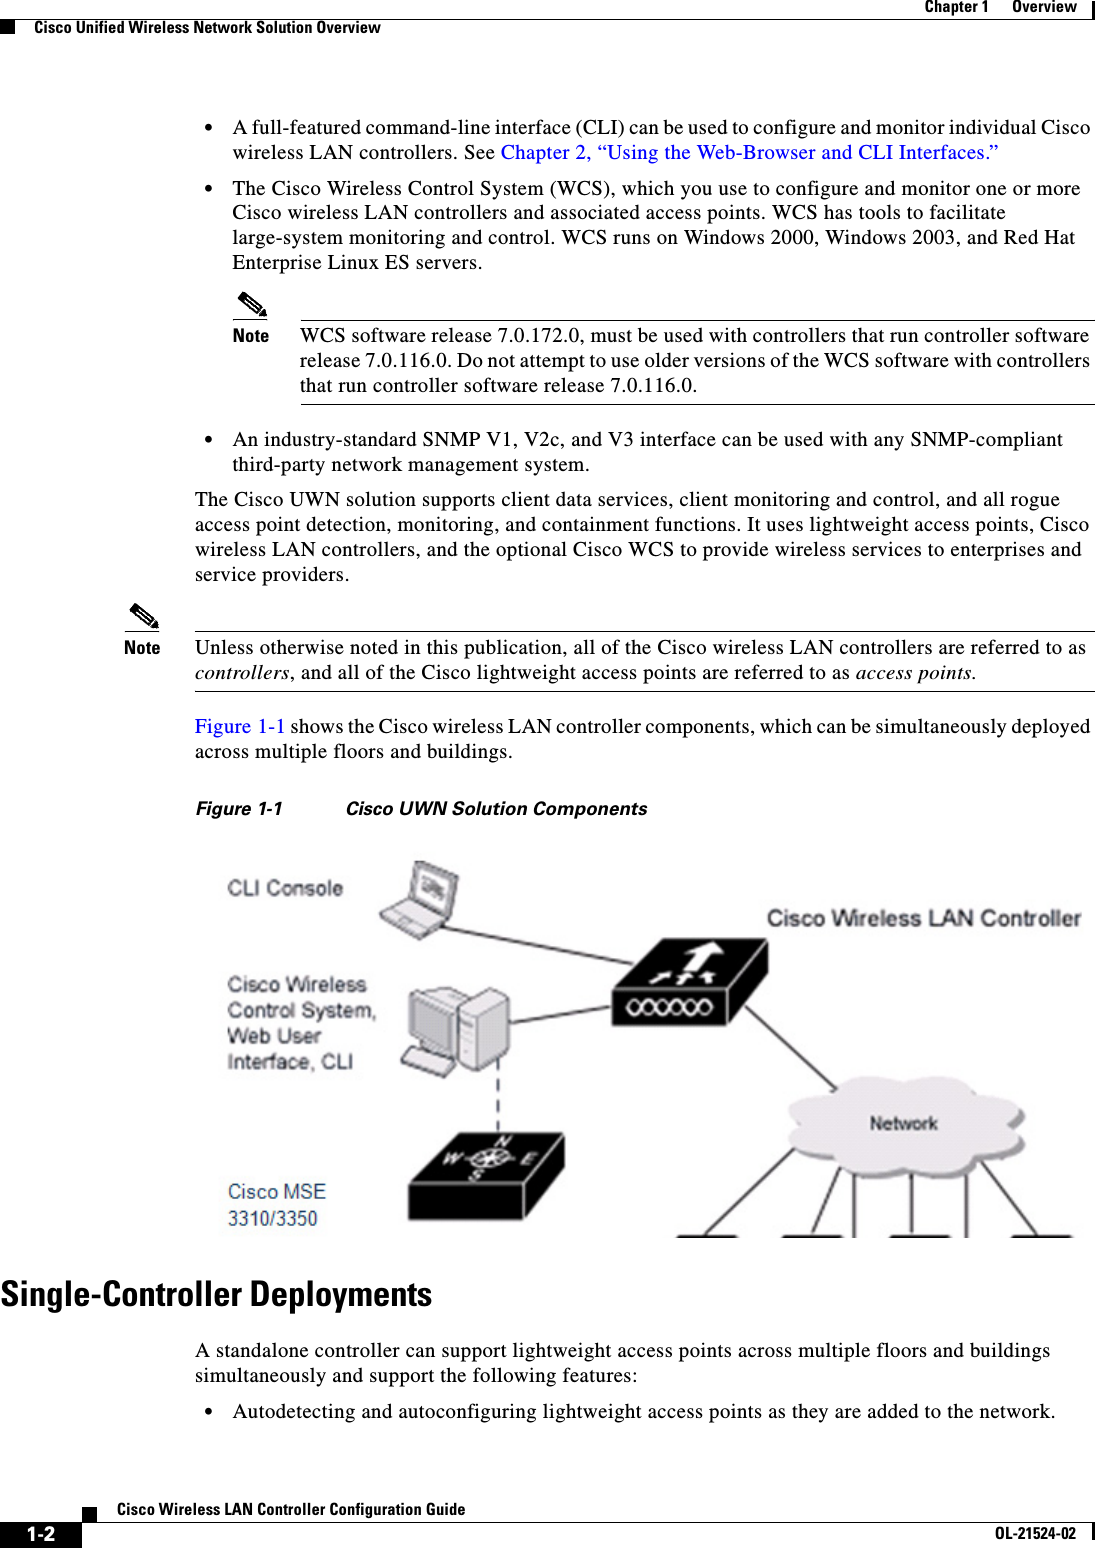  1-2Cisco Wireless LAN Controller Configuration GuideOL-21524-02Chapter 1      OverviewCisco Unified Wireless Network Solution Overview  • A full-featured command-line interface (CLI) can be used to configure and monitor individual Cisco wireless LAN controllers. See Chapter 2, “Using the Web-Browser and CLI Interfaces.”  • The Cisco Wireless Control System (WCS), which you use to configure and monitor one or more Cisco wireless LAN controllers and associated access points. WCS has tools to facilitate large-system monitoring and control. WCS runs on Windows 2000, Windows 2003, and Red Hat Enterprise Linux ES servers.Note WCS software release 7.0.172.0, must be used with controllers that run controller software release 7.0.116.0. Do not attempt to use older versions of the WCS software with controllers that run controller software release 7.0.116.0.  • An industry-standard SNMP V1, V2c, and V3 interface can be used with any SNMP-compliant third-party network management system.The Cisco UWN solution supports client data services, client monitoring and control, and all rogue access point detection, monitoring, and containment functions. It uses lightweight access points, Cisco wireless LAN controllers, and the optional Cisco WCS to provide wireless services to enterprises and service providers.Note Unless otherwise noted in this publication, all of the Cisco wireless LAN controllers are referred to as controllers, and all of the Cisco lightweight access points are referred to as access points.Figure 1-1 shows the Cisco wireless LAN controller components, which can be simultaneously deployed across multiple floors and buildings.Figure 1-1 Cisco UWN Solution ComponentsSingle-Controller DeploymentsA standalone controller can support lightweight access points across multiple floors and buildings simultaneously and support the following features:  • Autodetecting and autoconfiguring lightweight access points as they are added to the network.